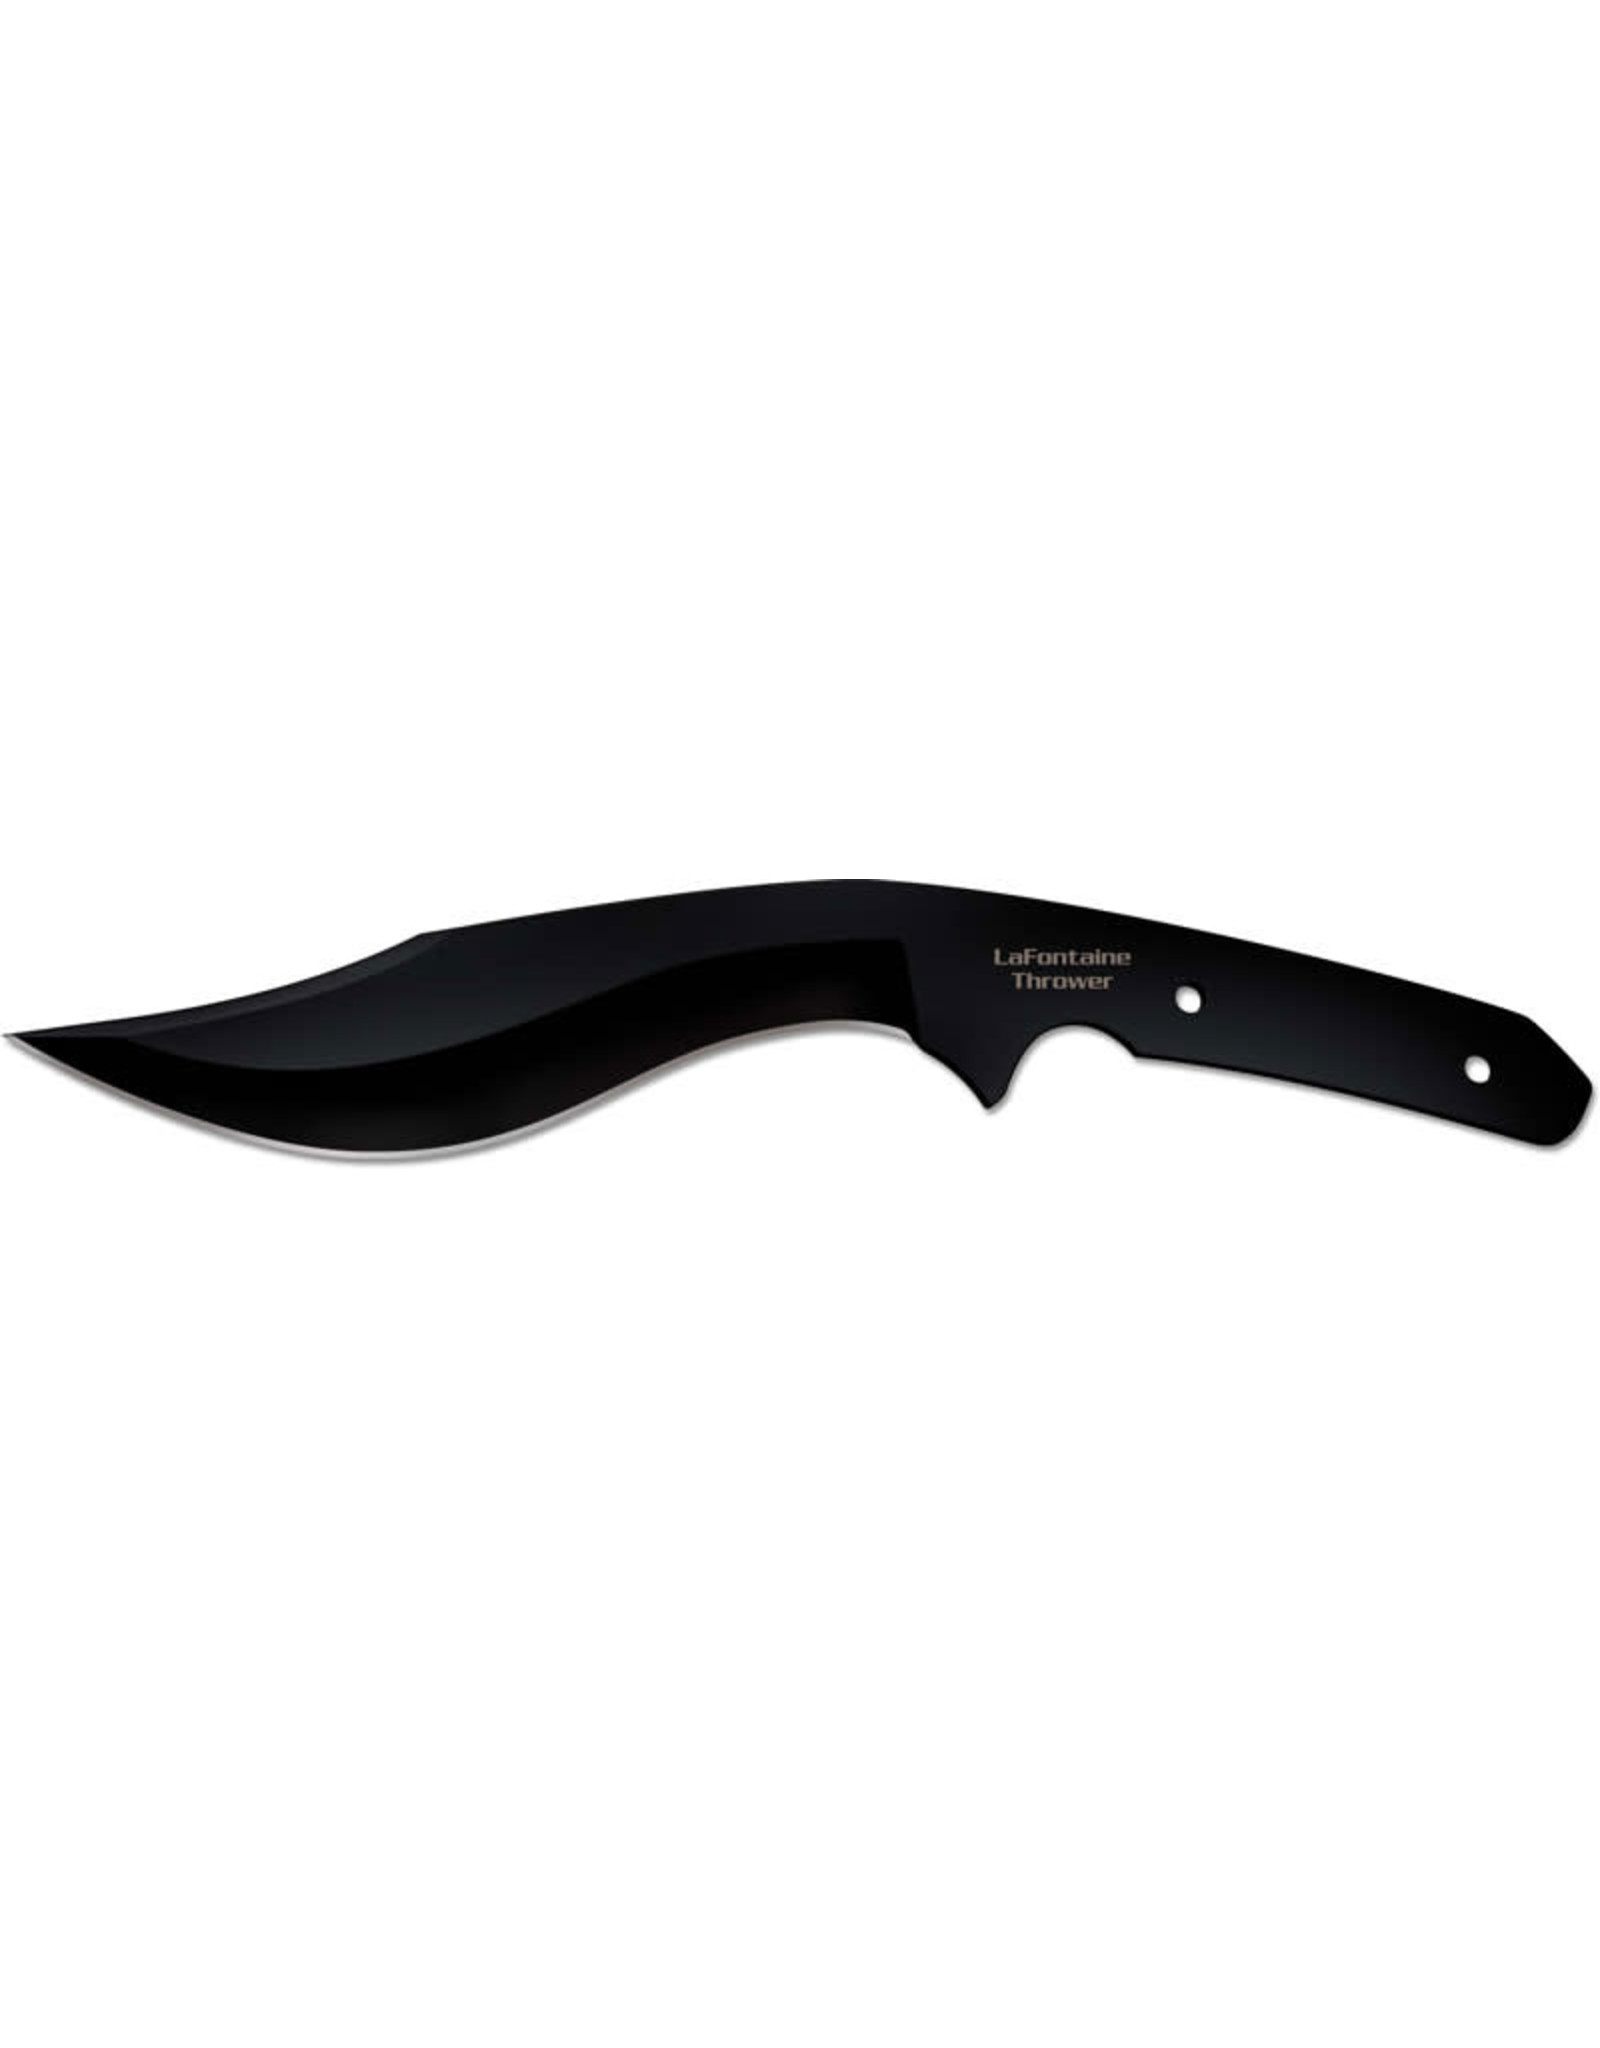 Cold Steel Cold Steel Lafontaine Thrower 80TLFZ